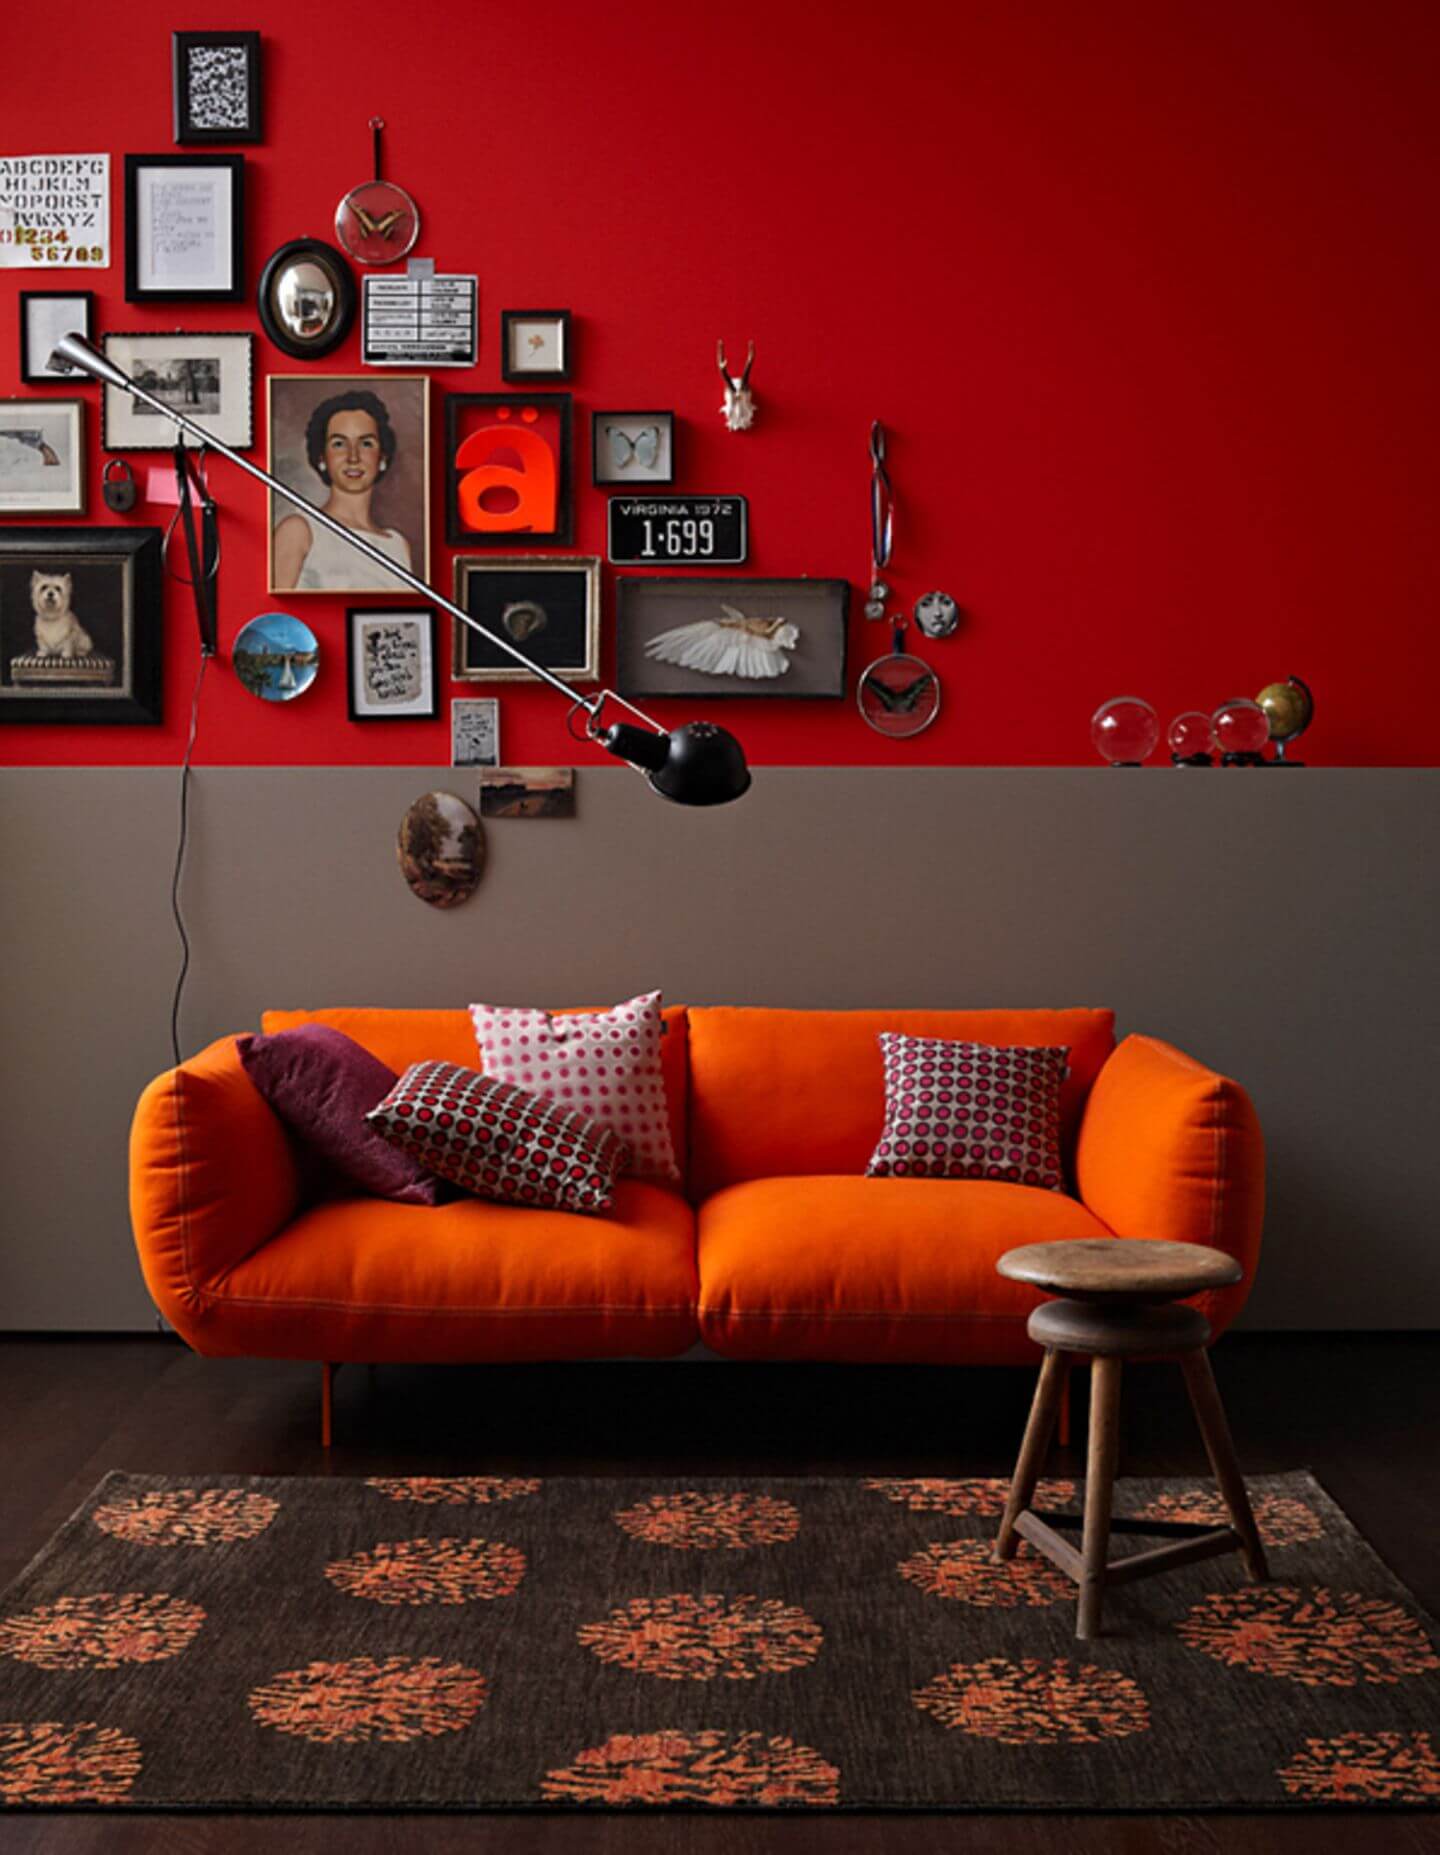 6. Red on the bicolor wall